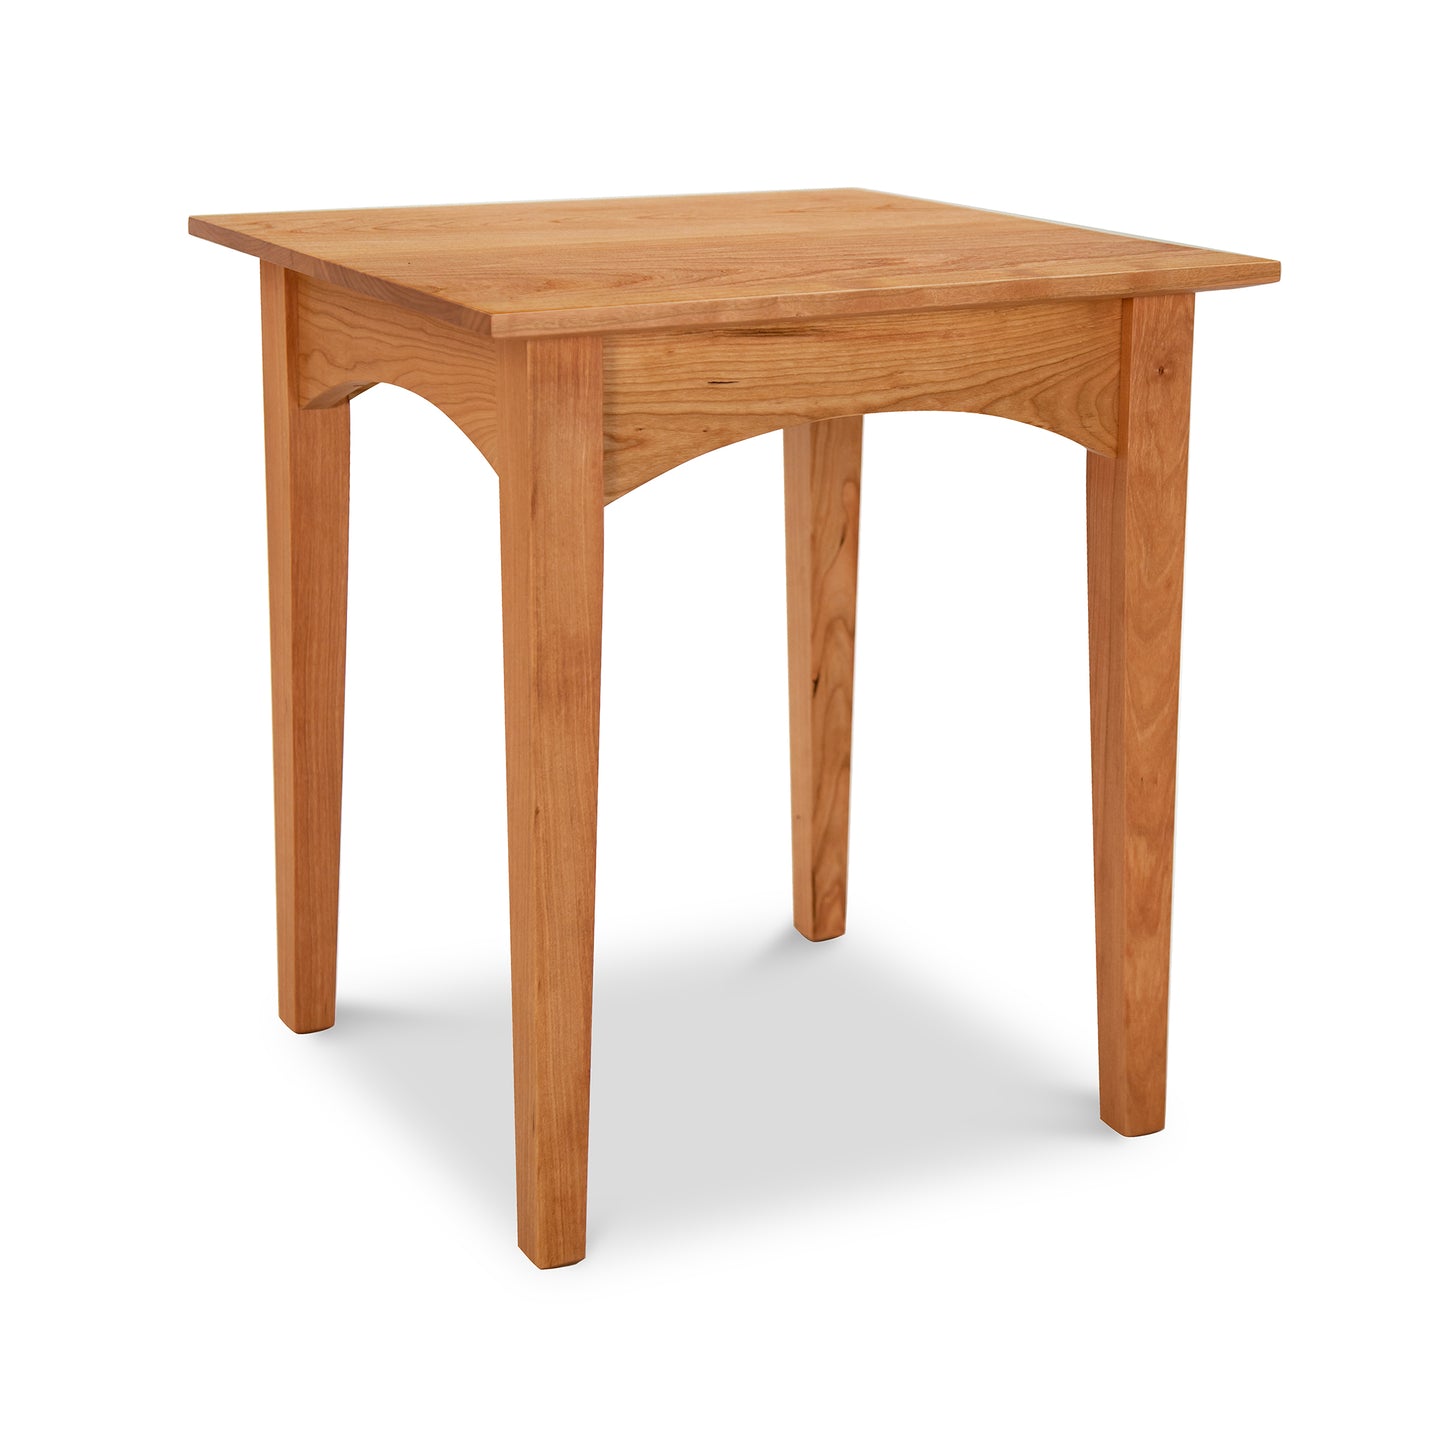 A simple American Shaker End Table with four straight legs on a white background, showcasing Vermont craftsmanship by Maple Corner Woodworks.